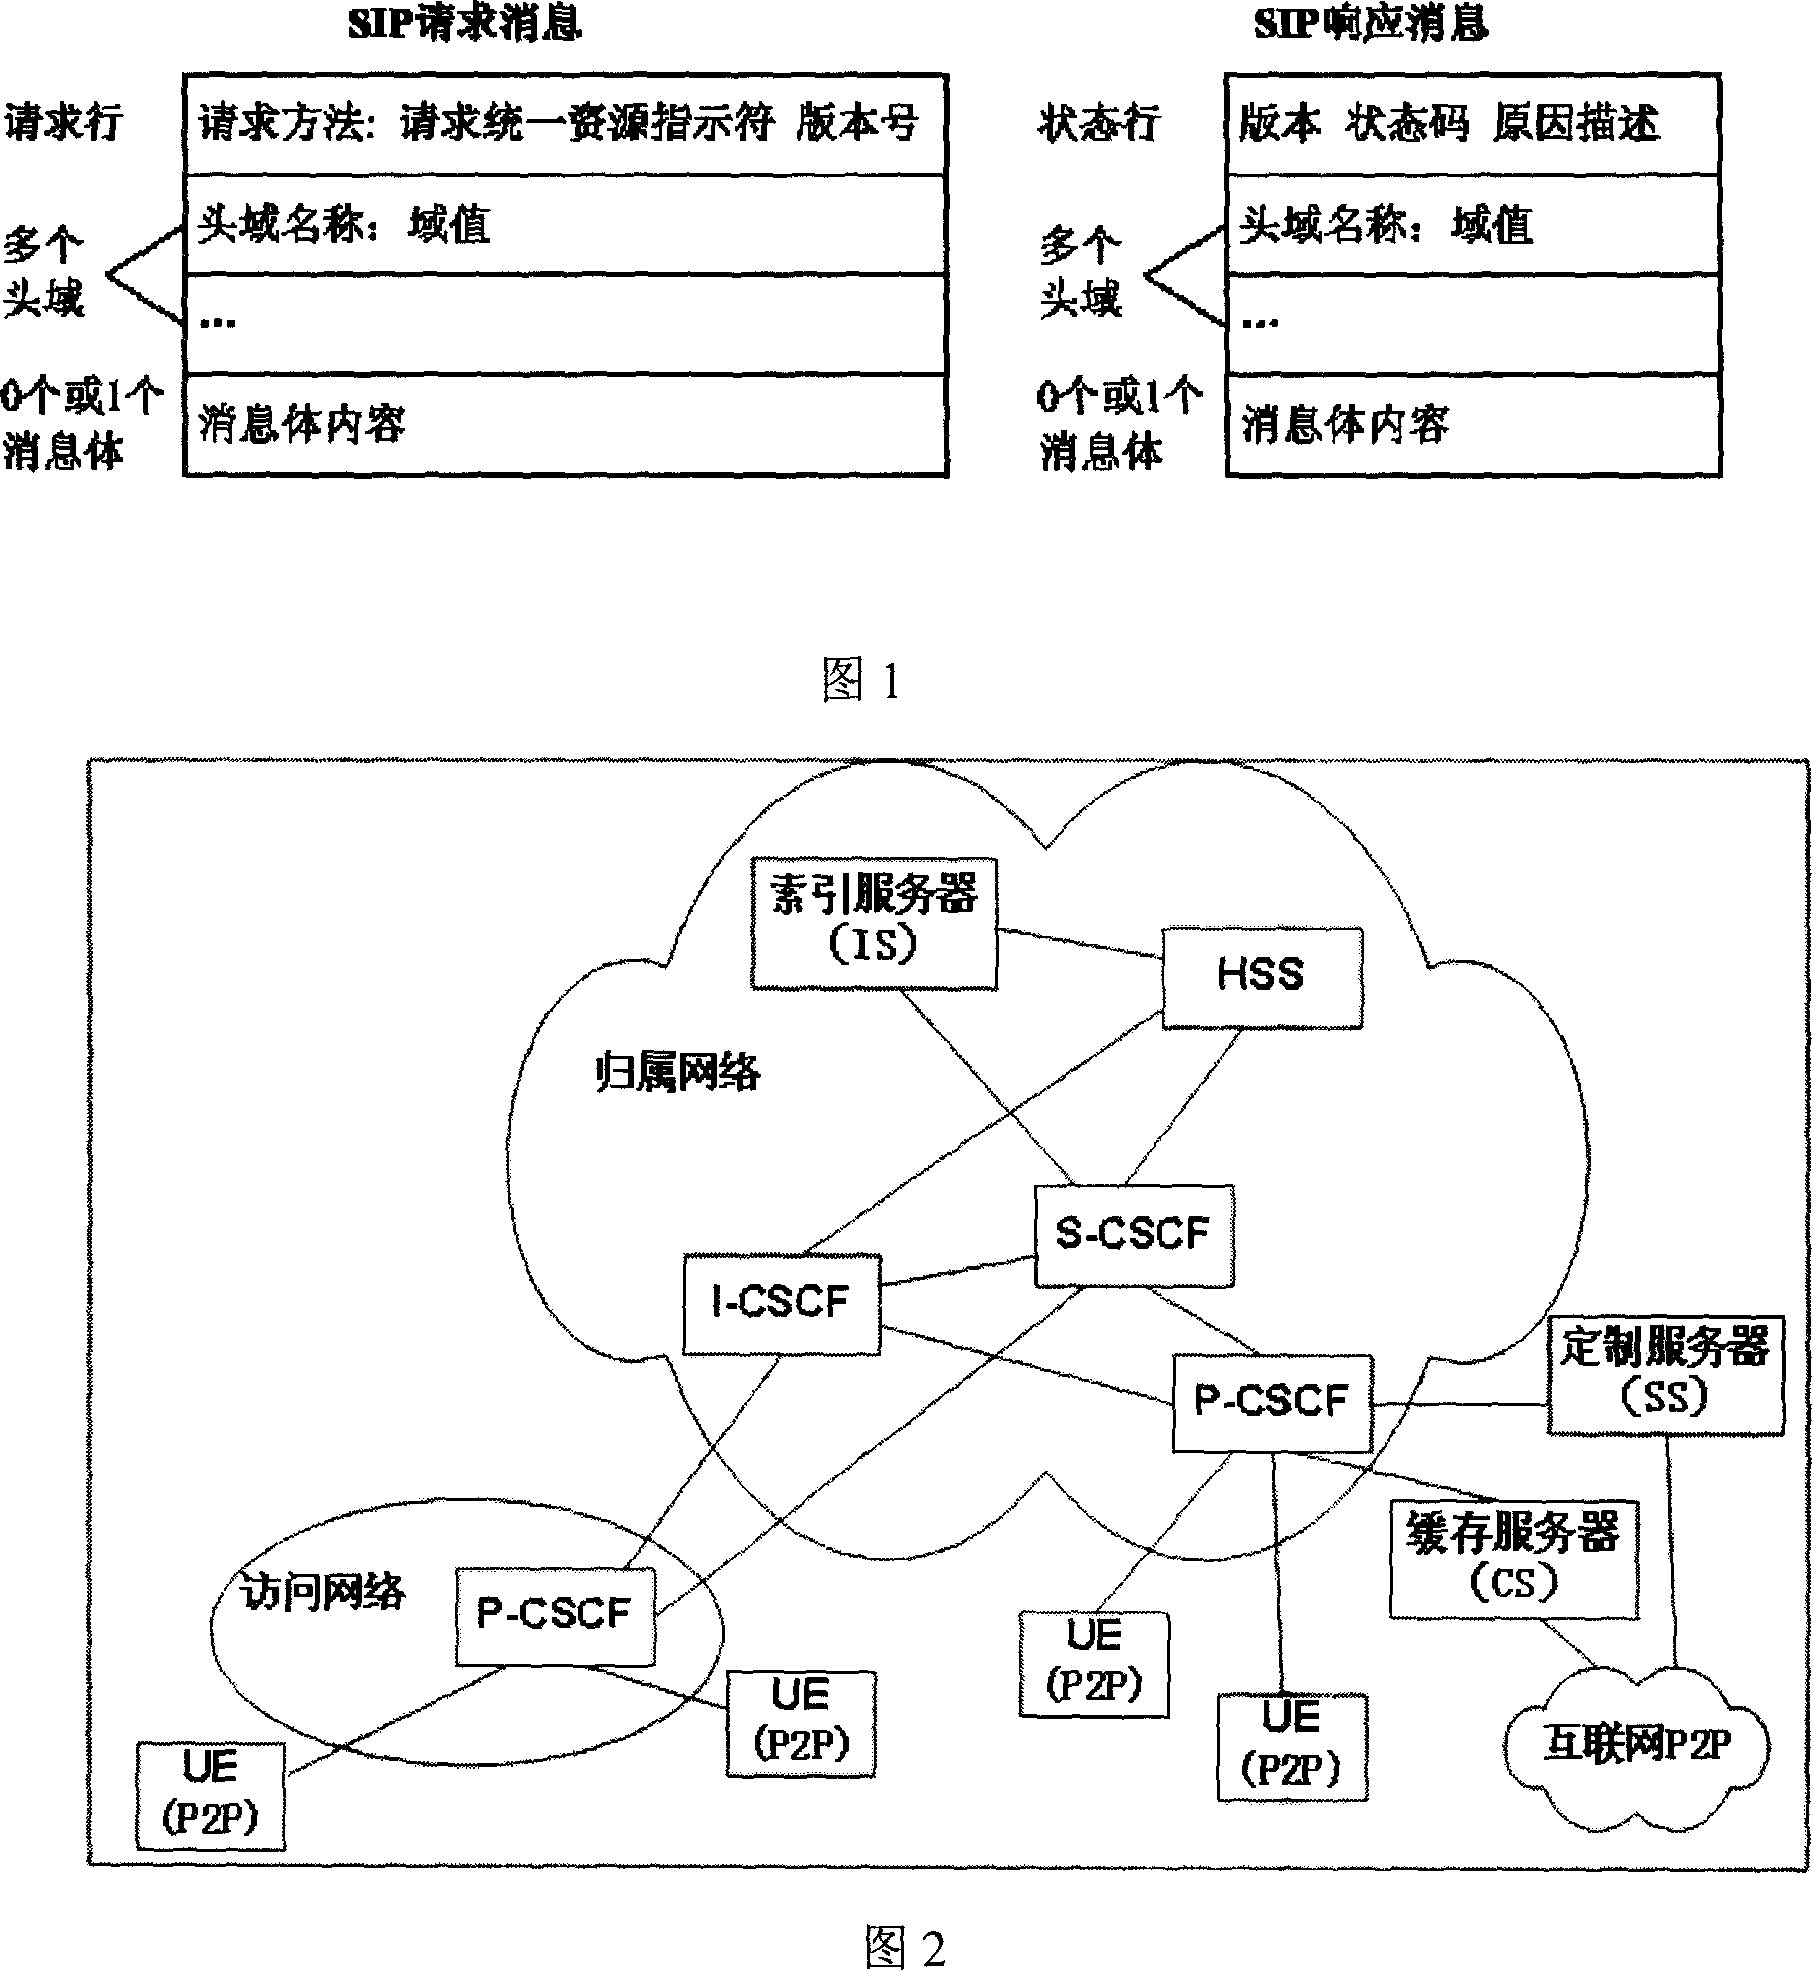 Signaling control method for P2P network sharing service based on IMS